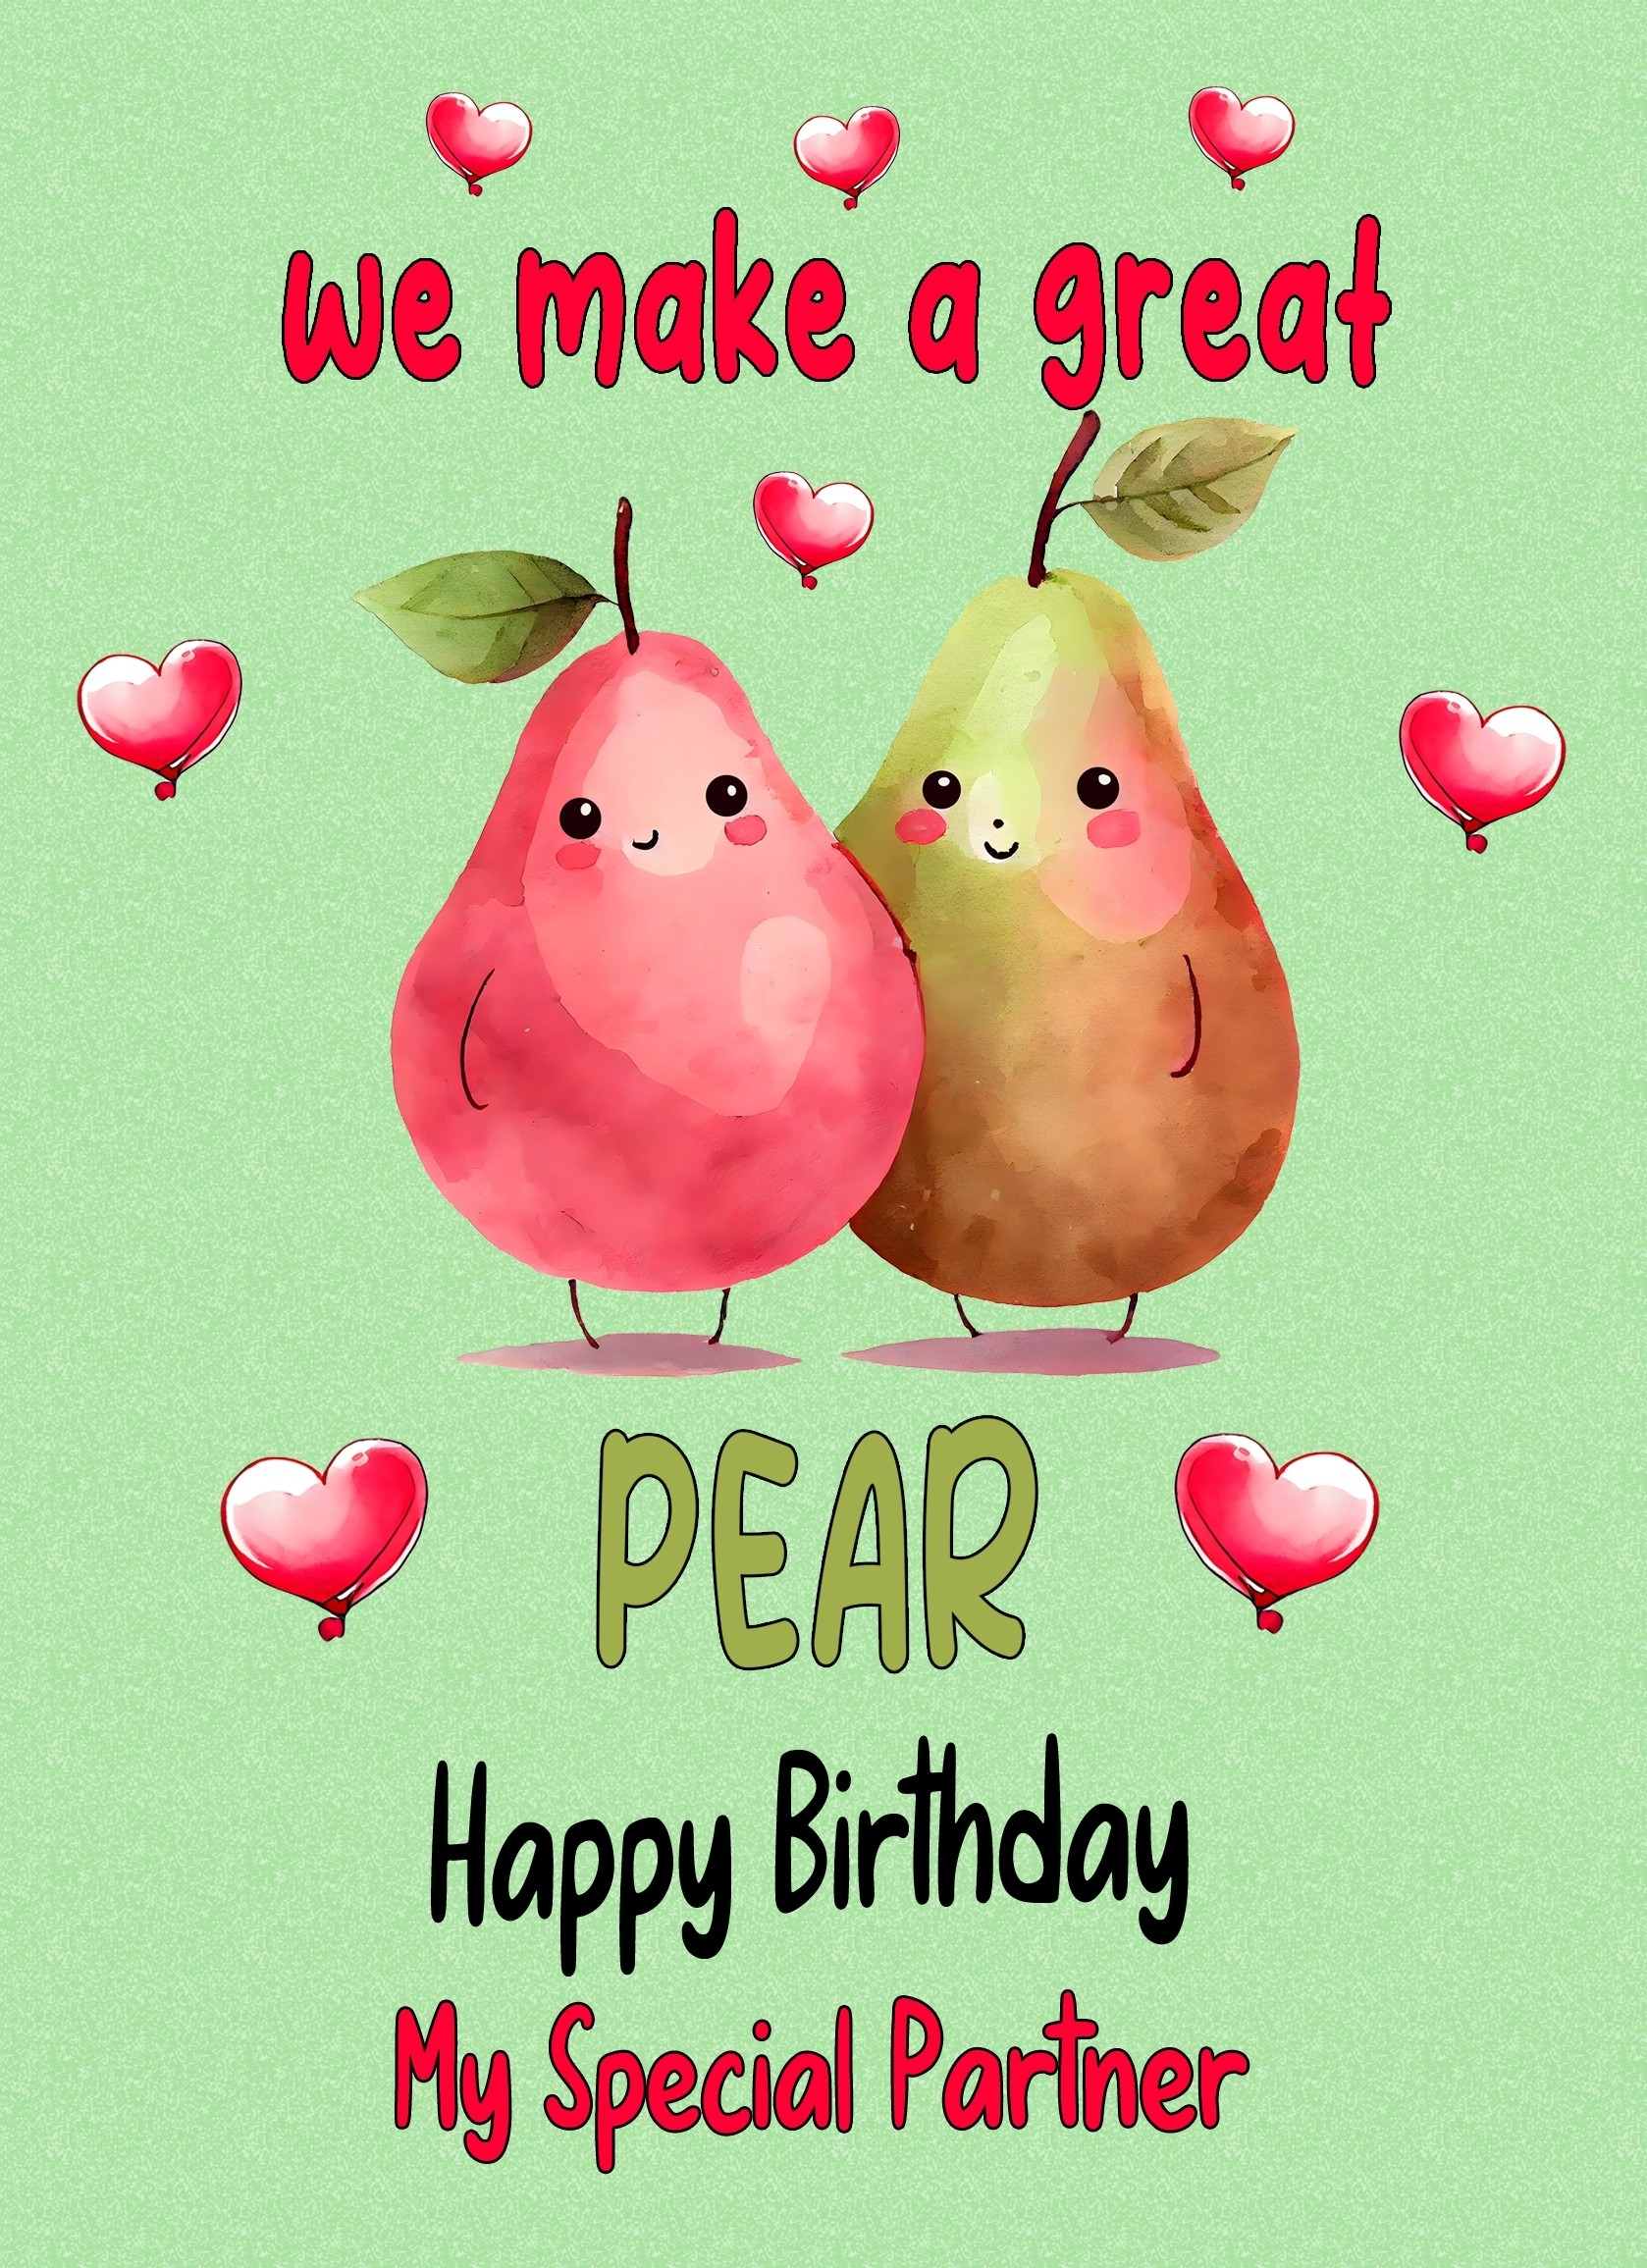 Funny Pun Romantic Birthday Card for Partner (Great Pear)